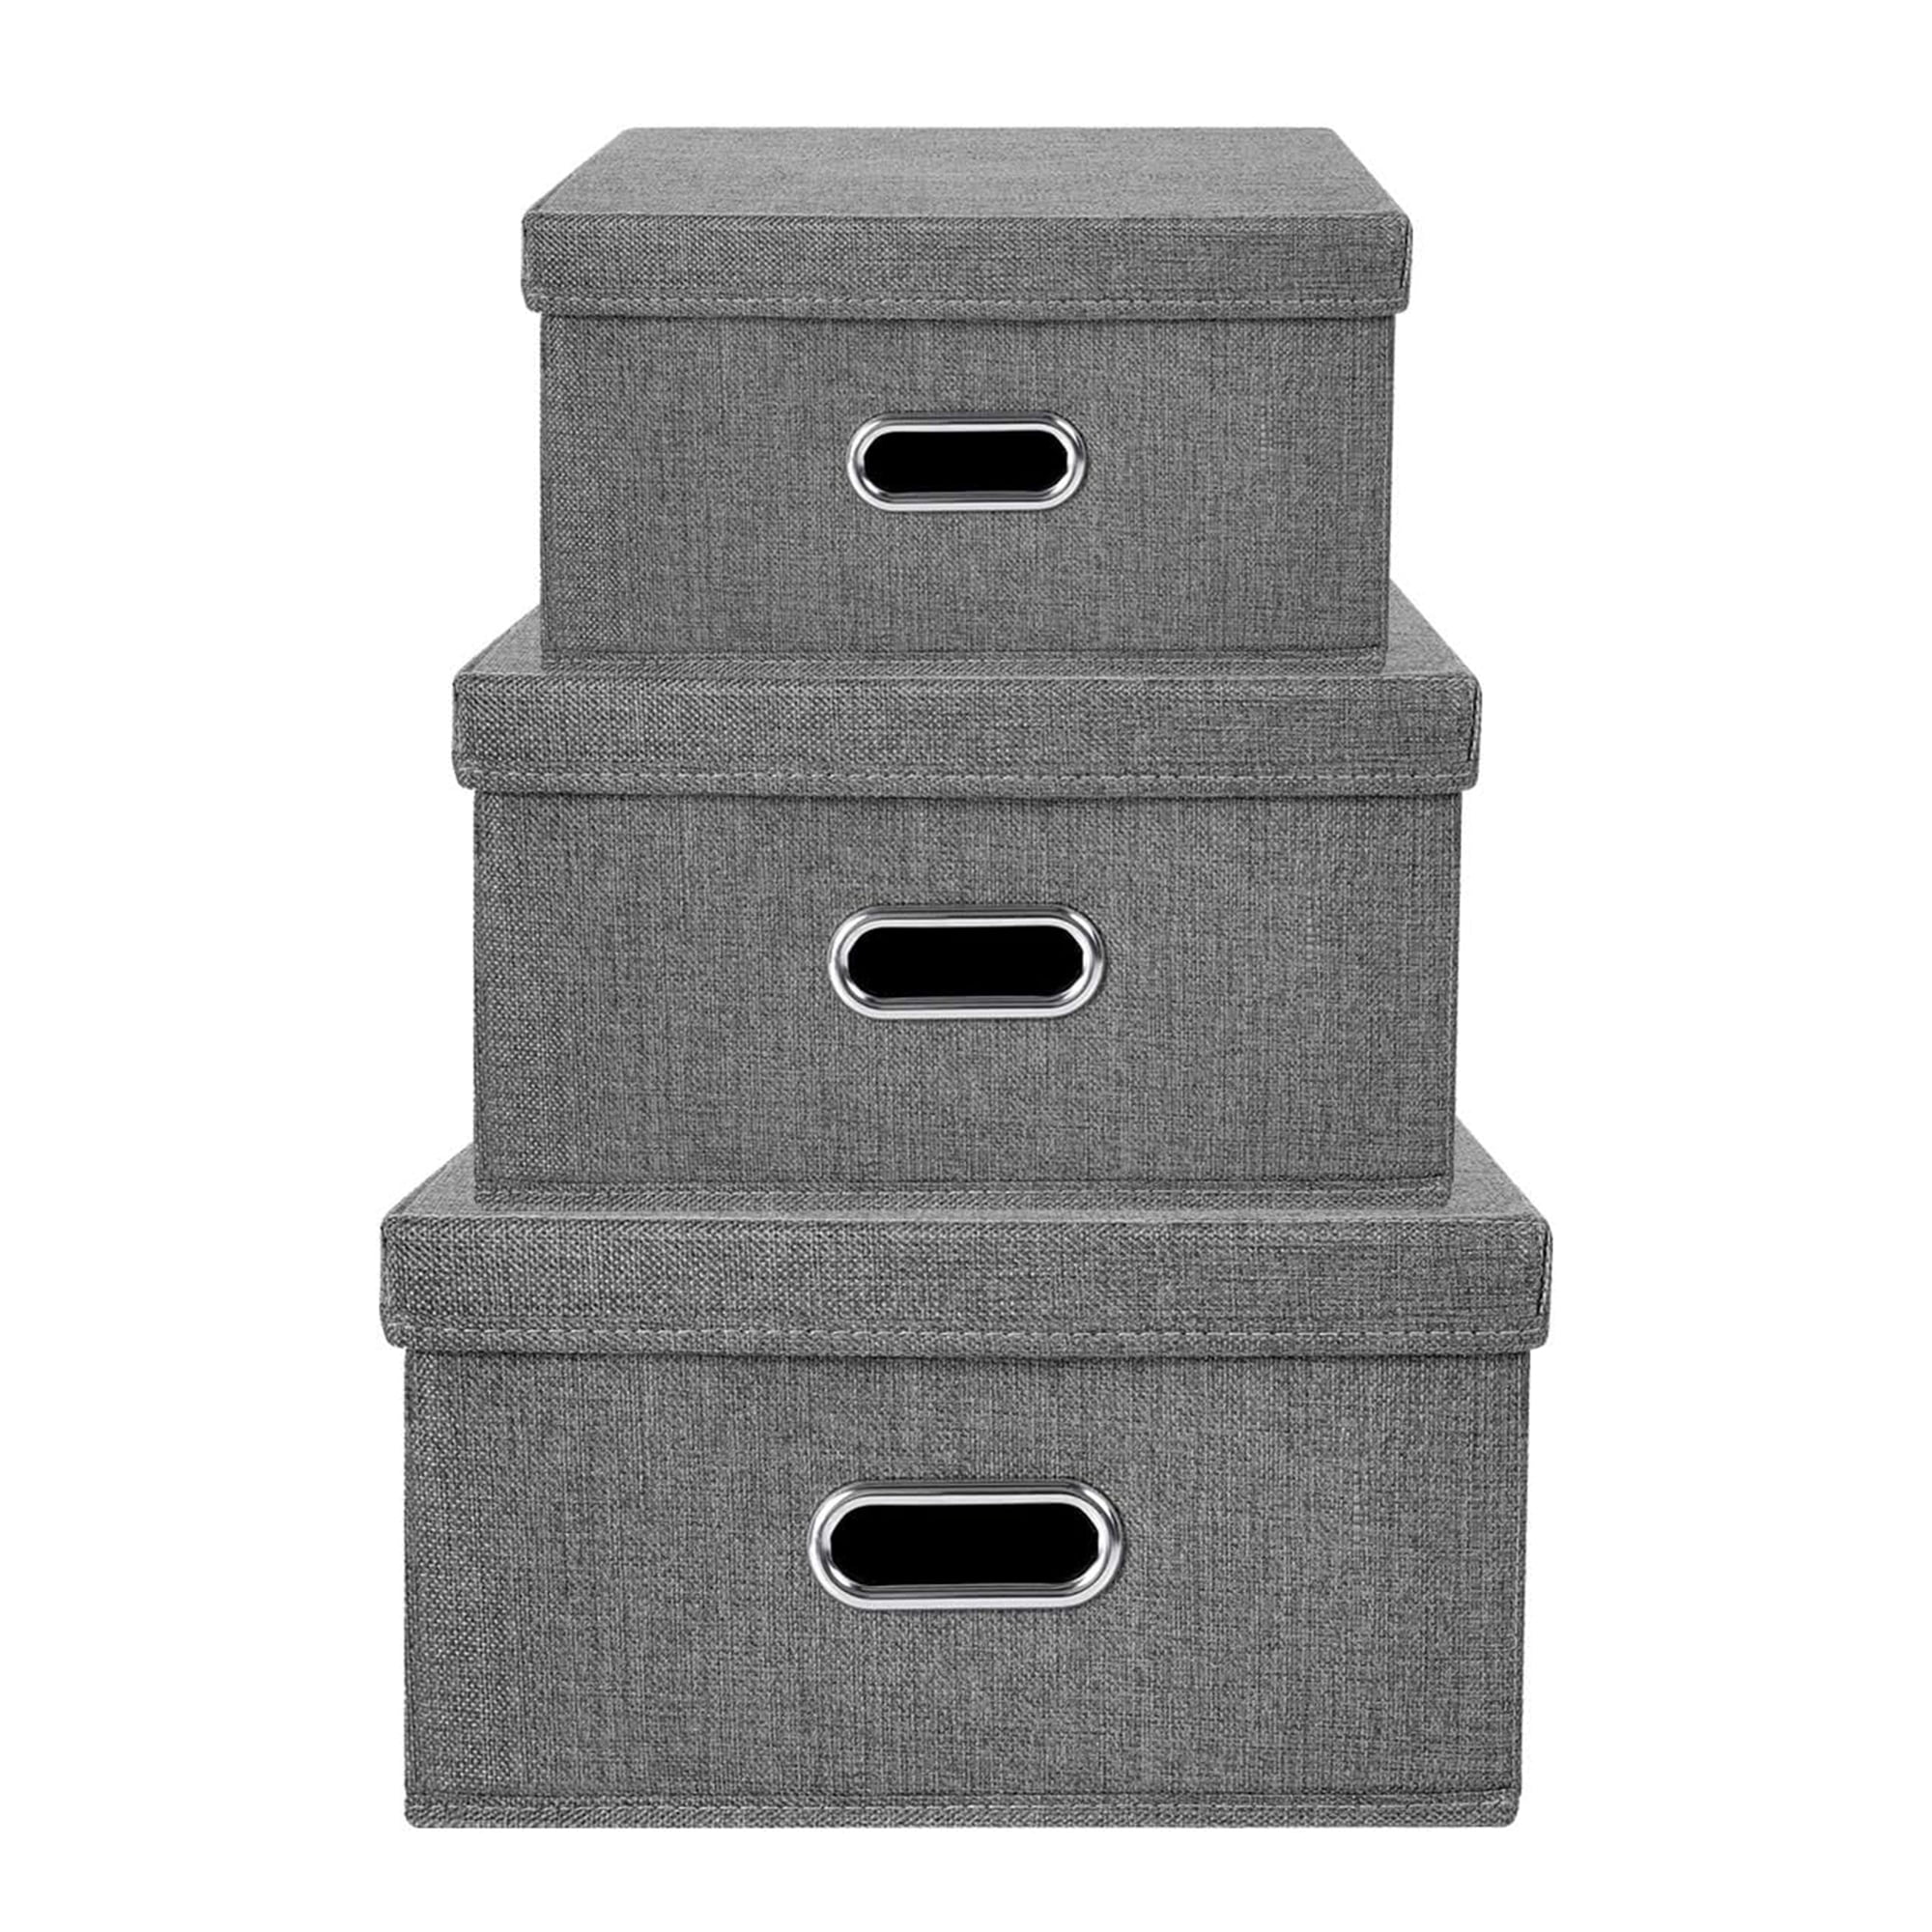 Small Storage Boxes with Lids 4 Pack Linen Collapsible Cube Storage Basket  with Handle, Jane's Home Foldable Fabric Storage Box with lids Organizer